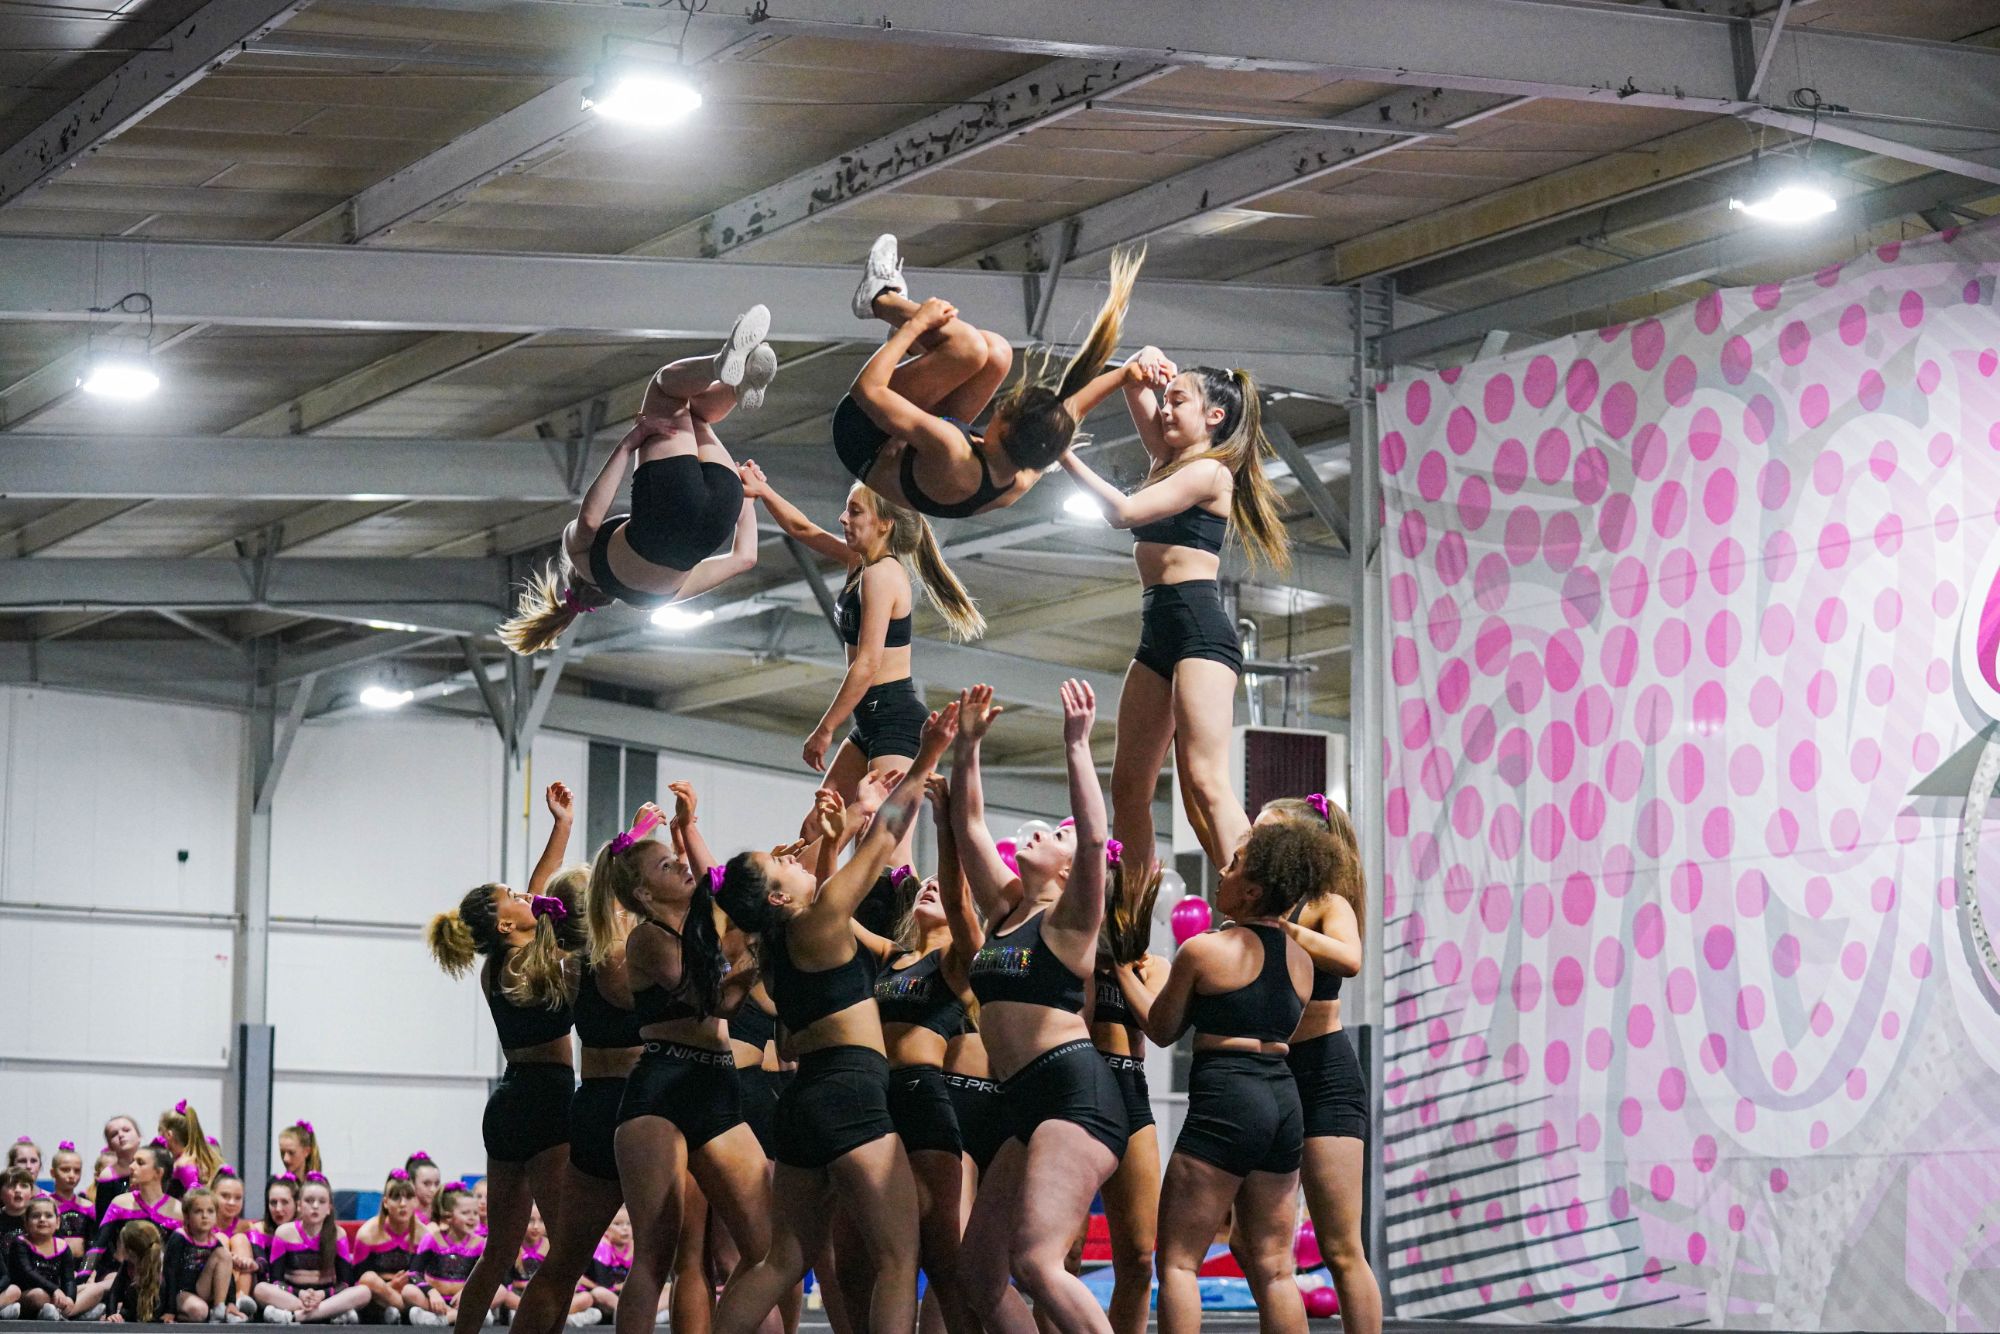 A group of girls doing cheer, with two raised up and standing and two in the air.